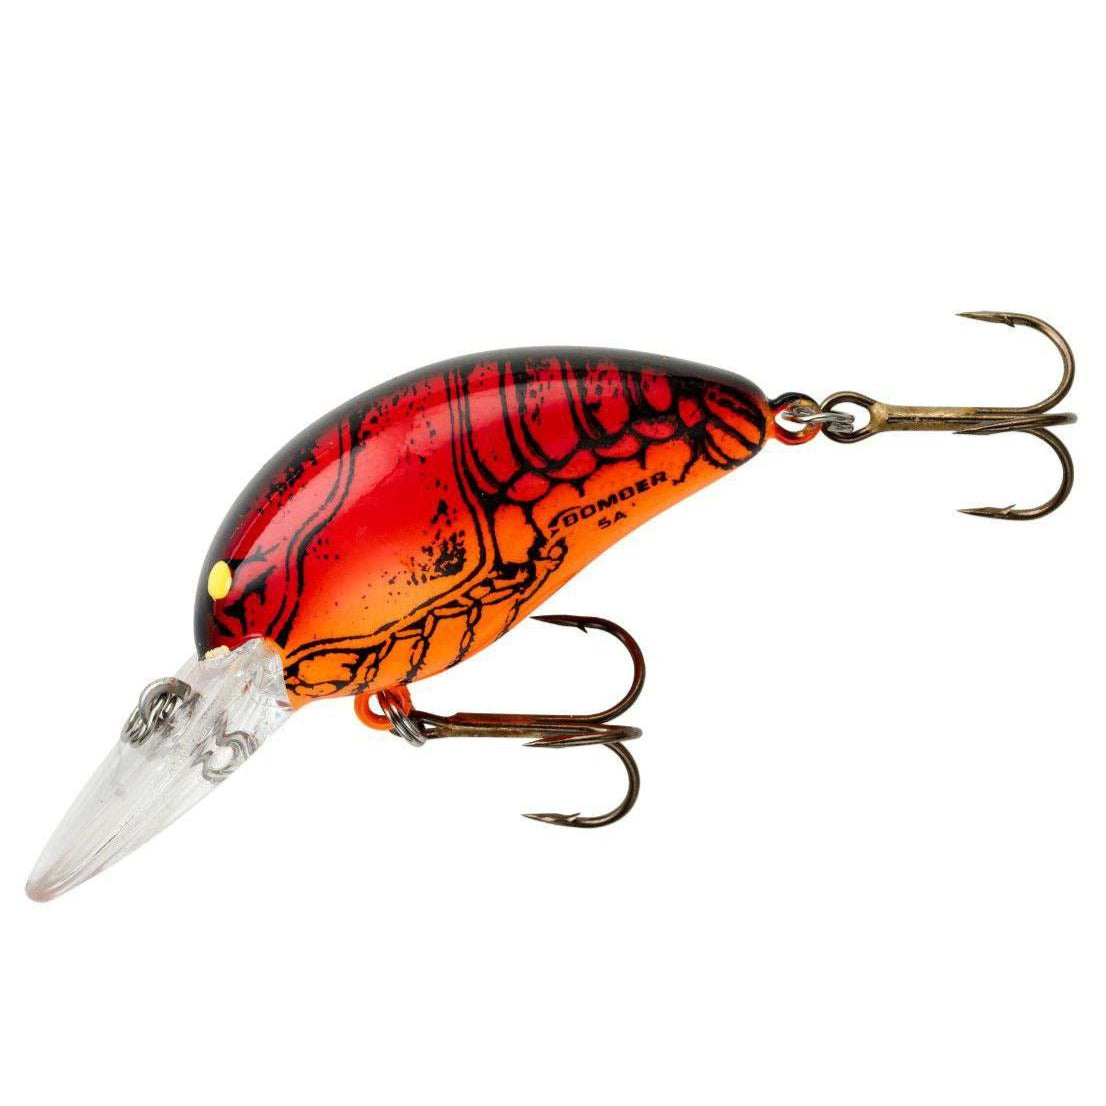 Bomber Square A - Red Apple Crawdad